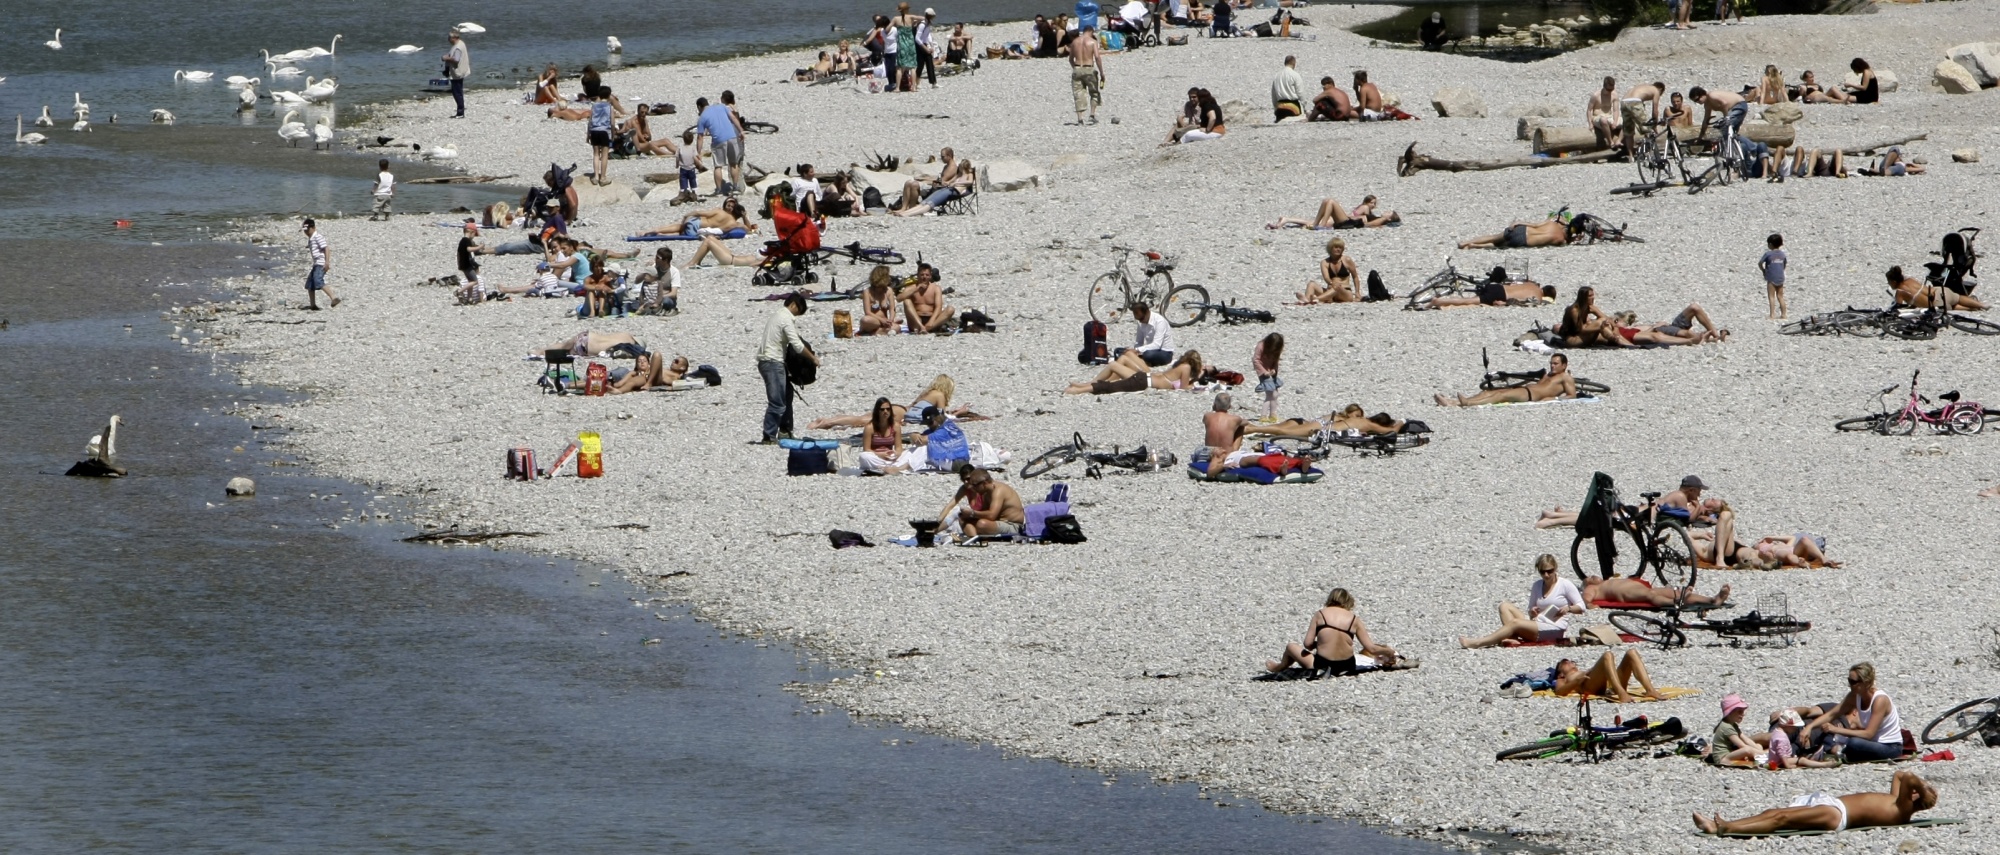 Beach Nude Poland - Why Munich Went Ahead and Set Up 6 Official 'Urban Naked Zones' - Bloomberg